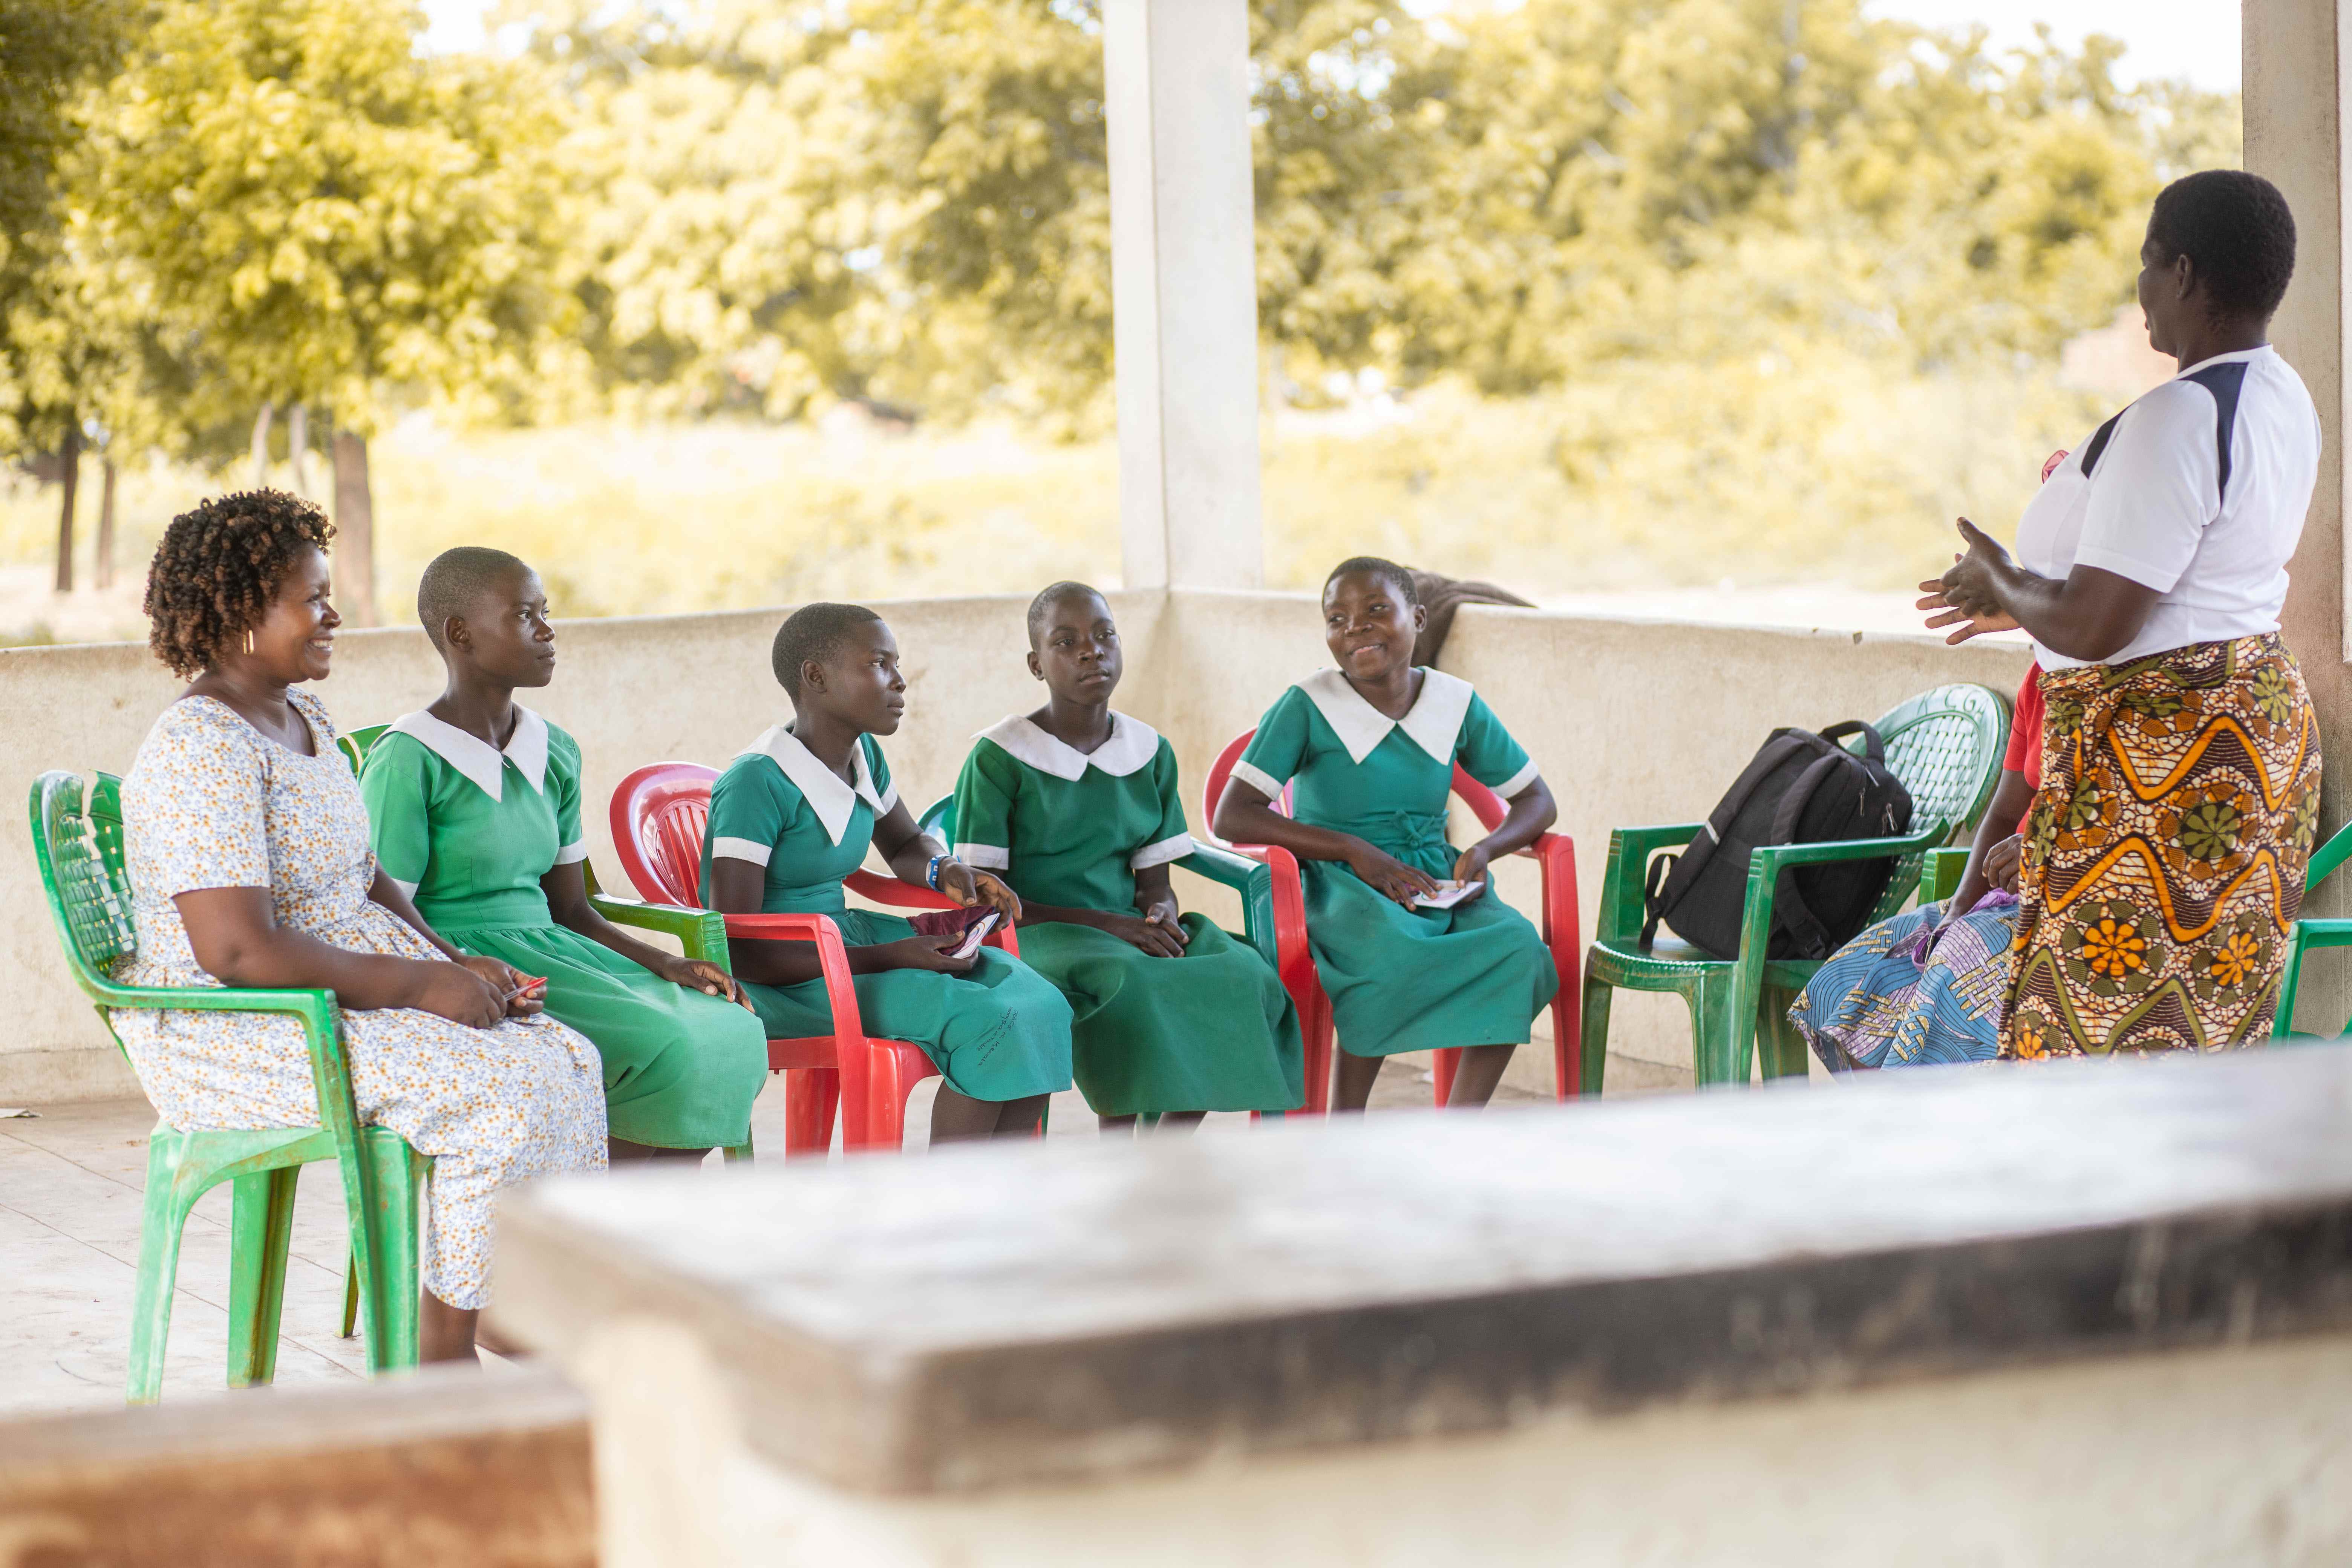 Menstruation accounts for about 12 to 26 days of absenteeism in a year for Malawian girls. UNICEF is supporting the Ministry of Education in equipping schools with sanitation facilities and providing girls with reusable sanitary pads to improve menstrual health and hygiene management.